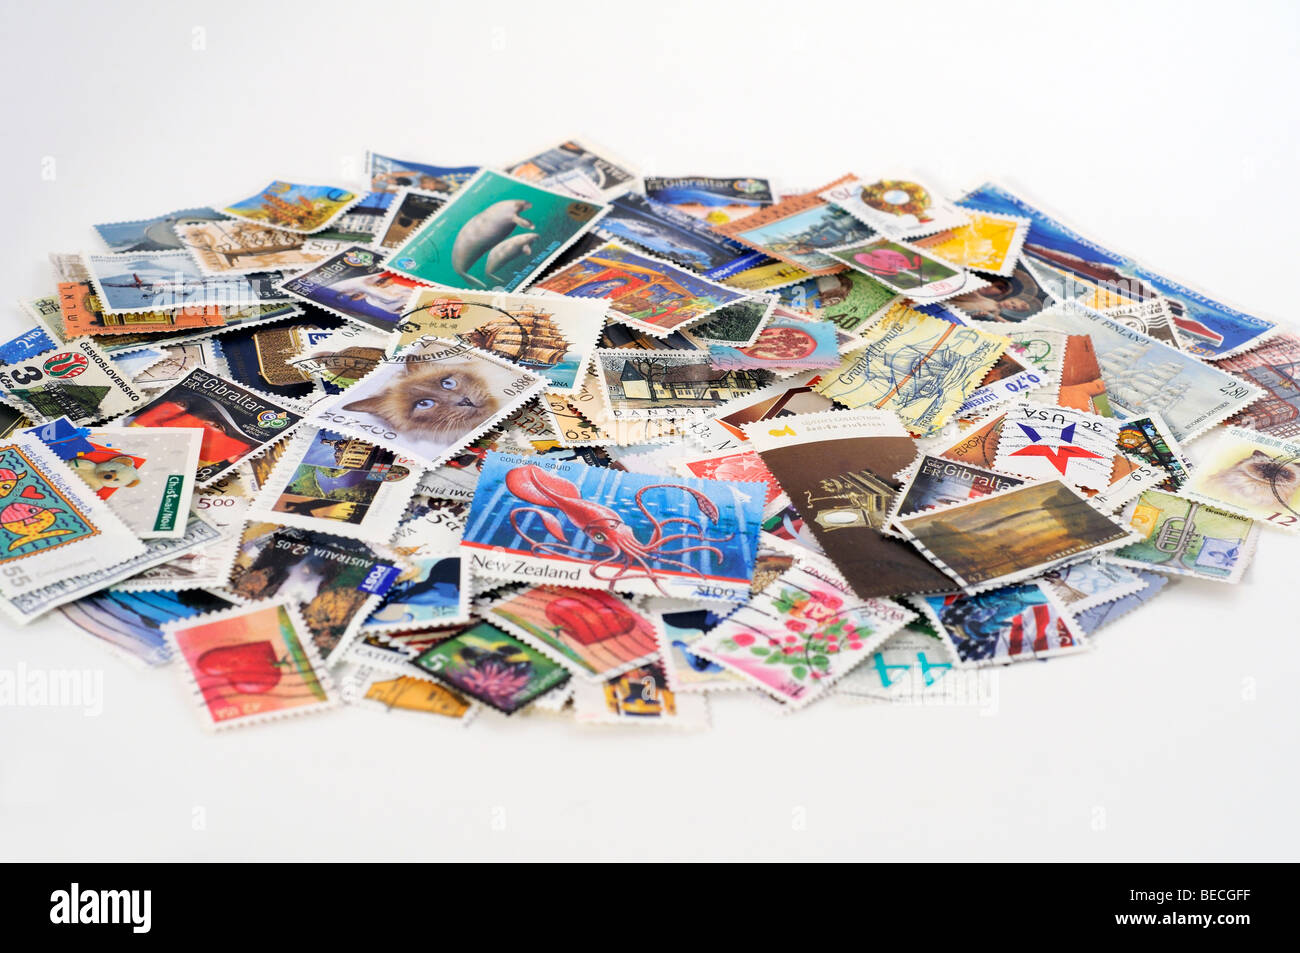 Assortment of postage stamps Stock Photo